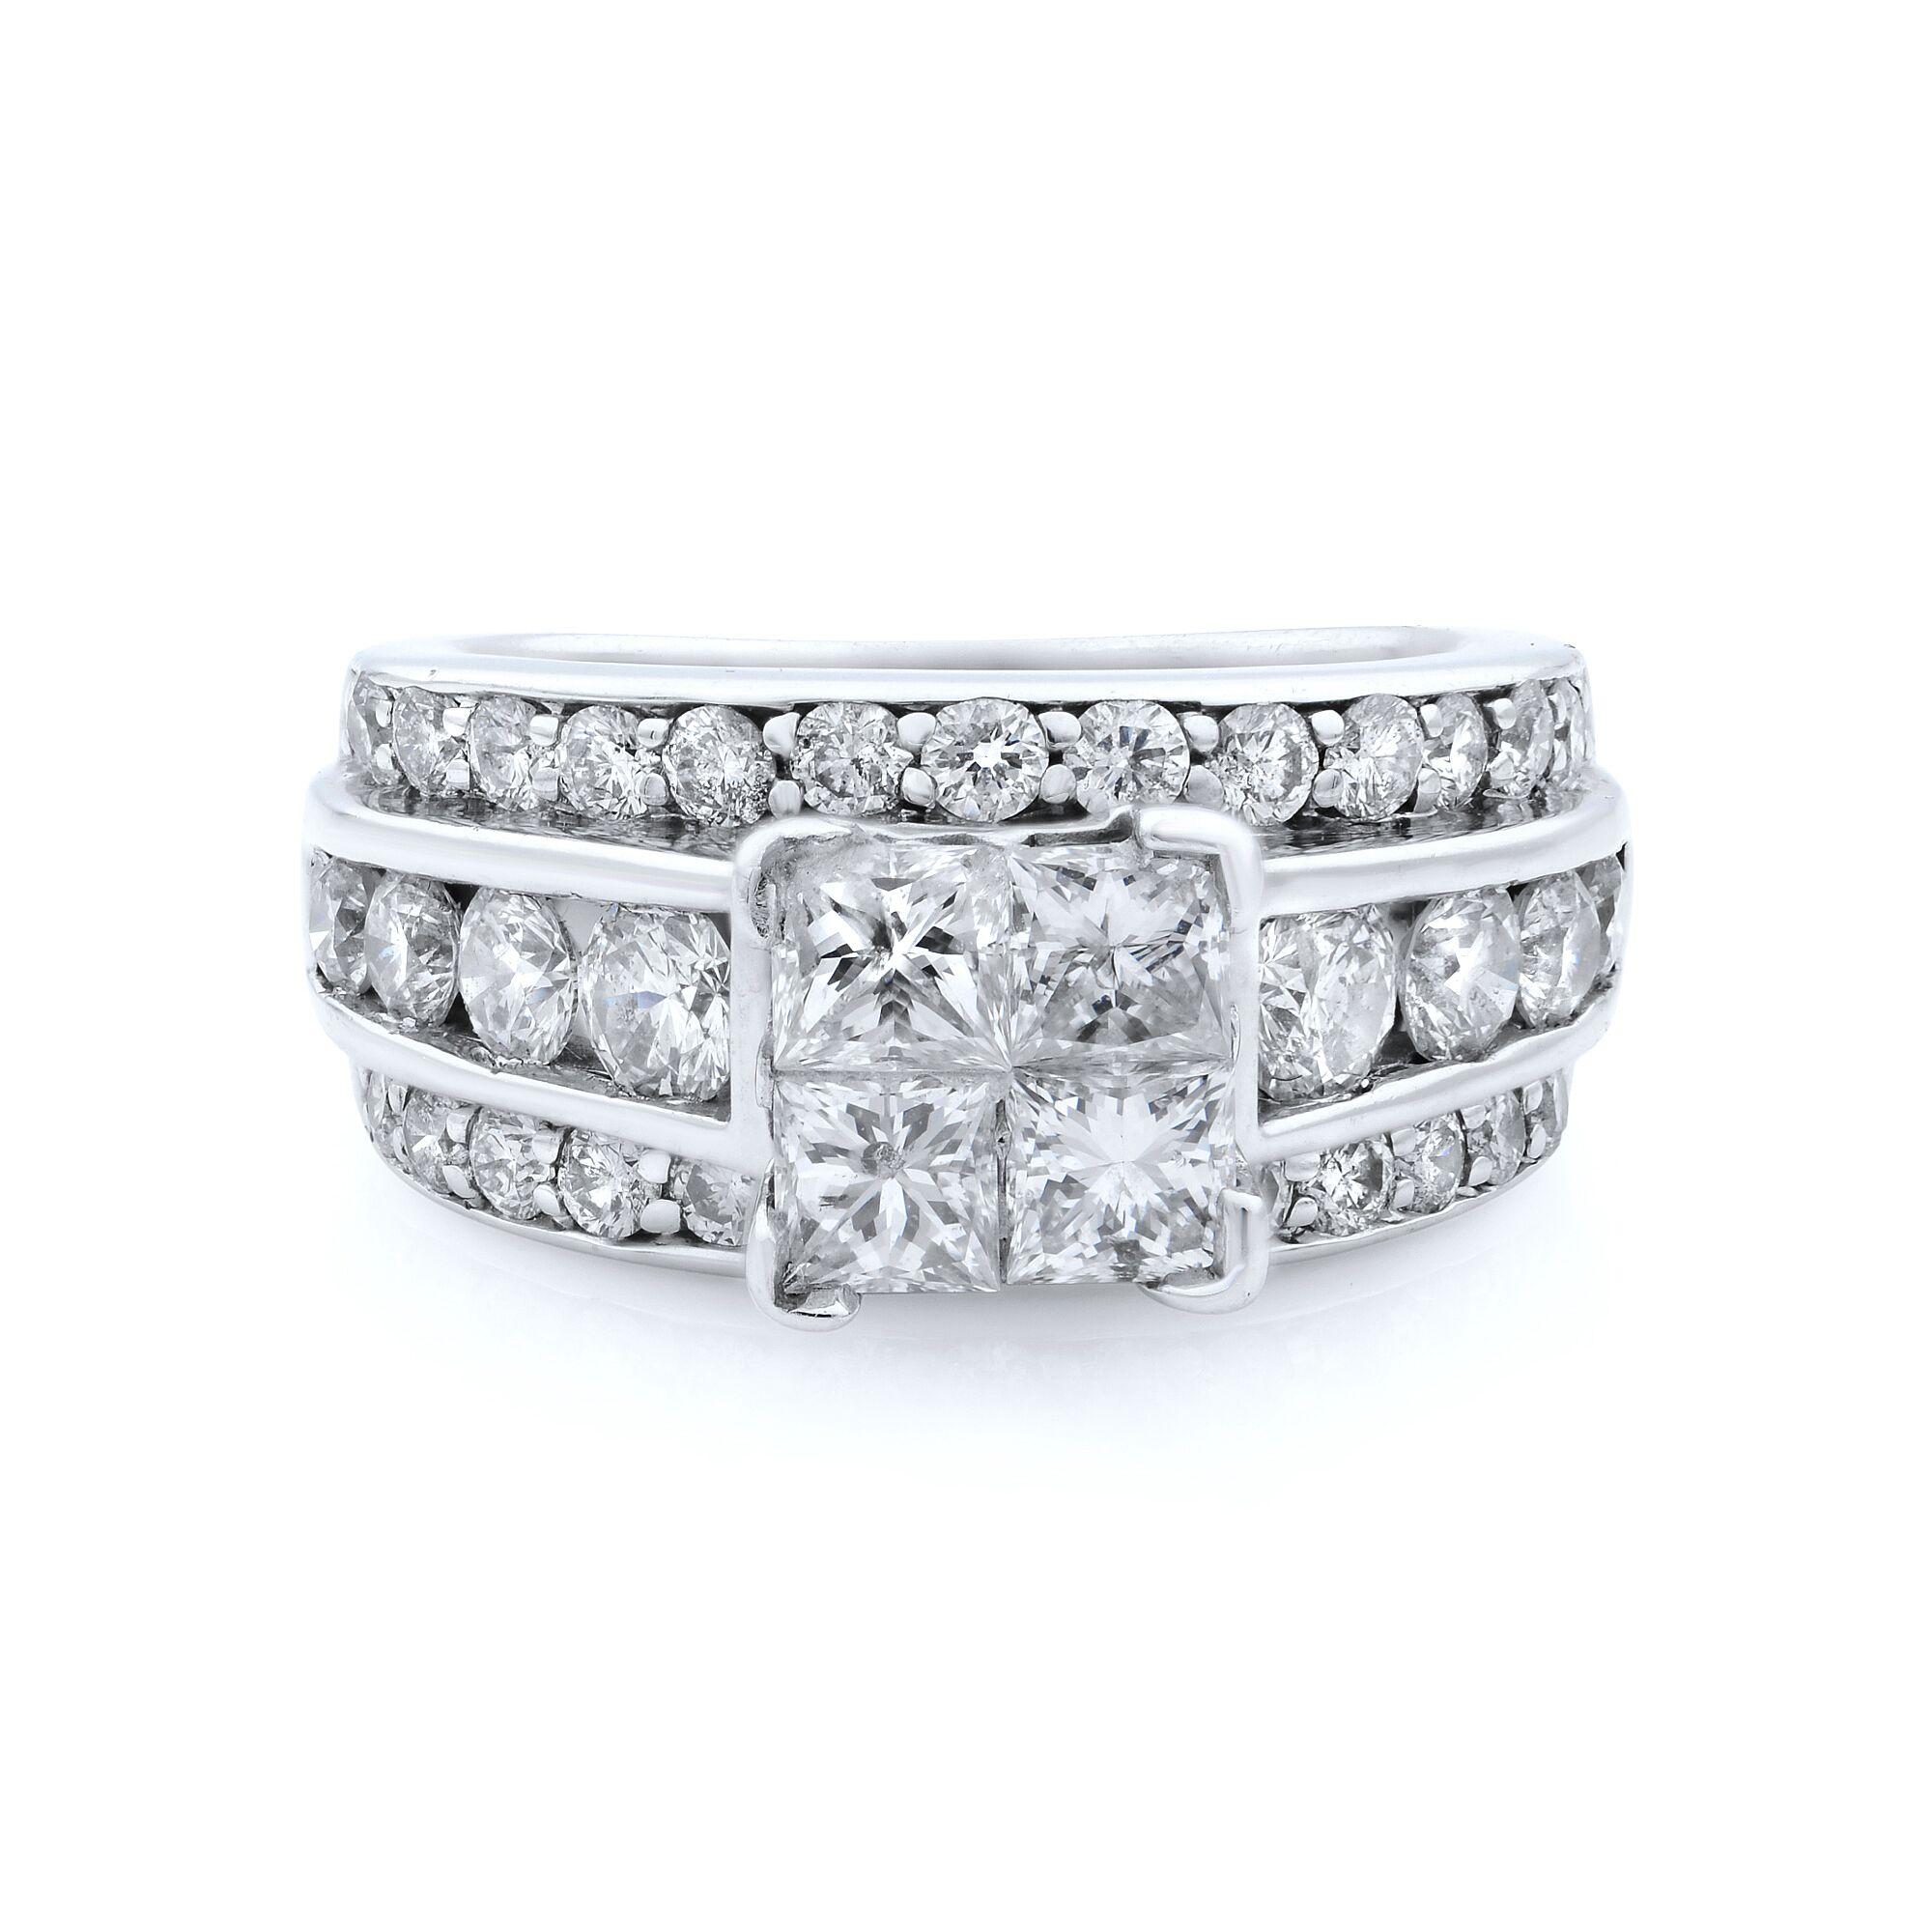 This unique engagement ring has a delicate four princess cut stones at a center, set with 14k white gold. The shank of this engagement ring  is set with round cut diamonds, spited into three line prong settings on the sides and a channel set in the